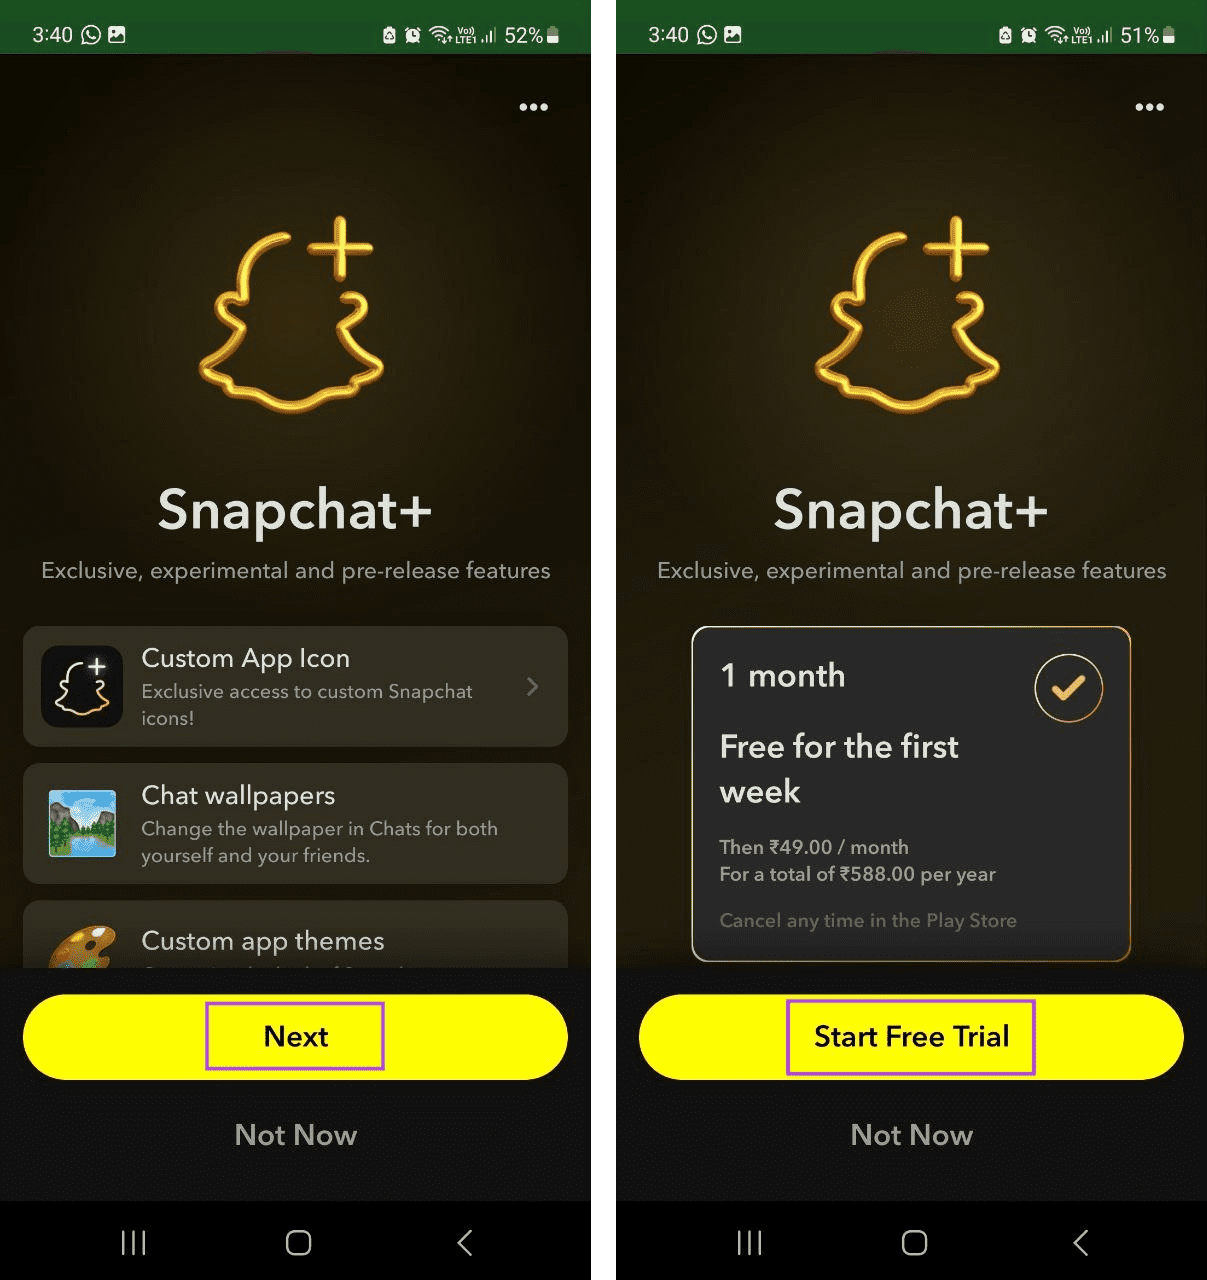 Subscribe to Snapchat +